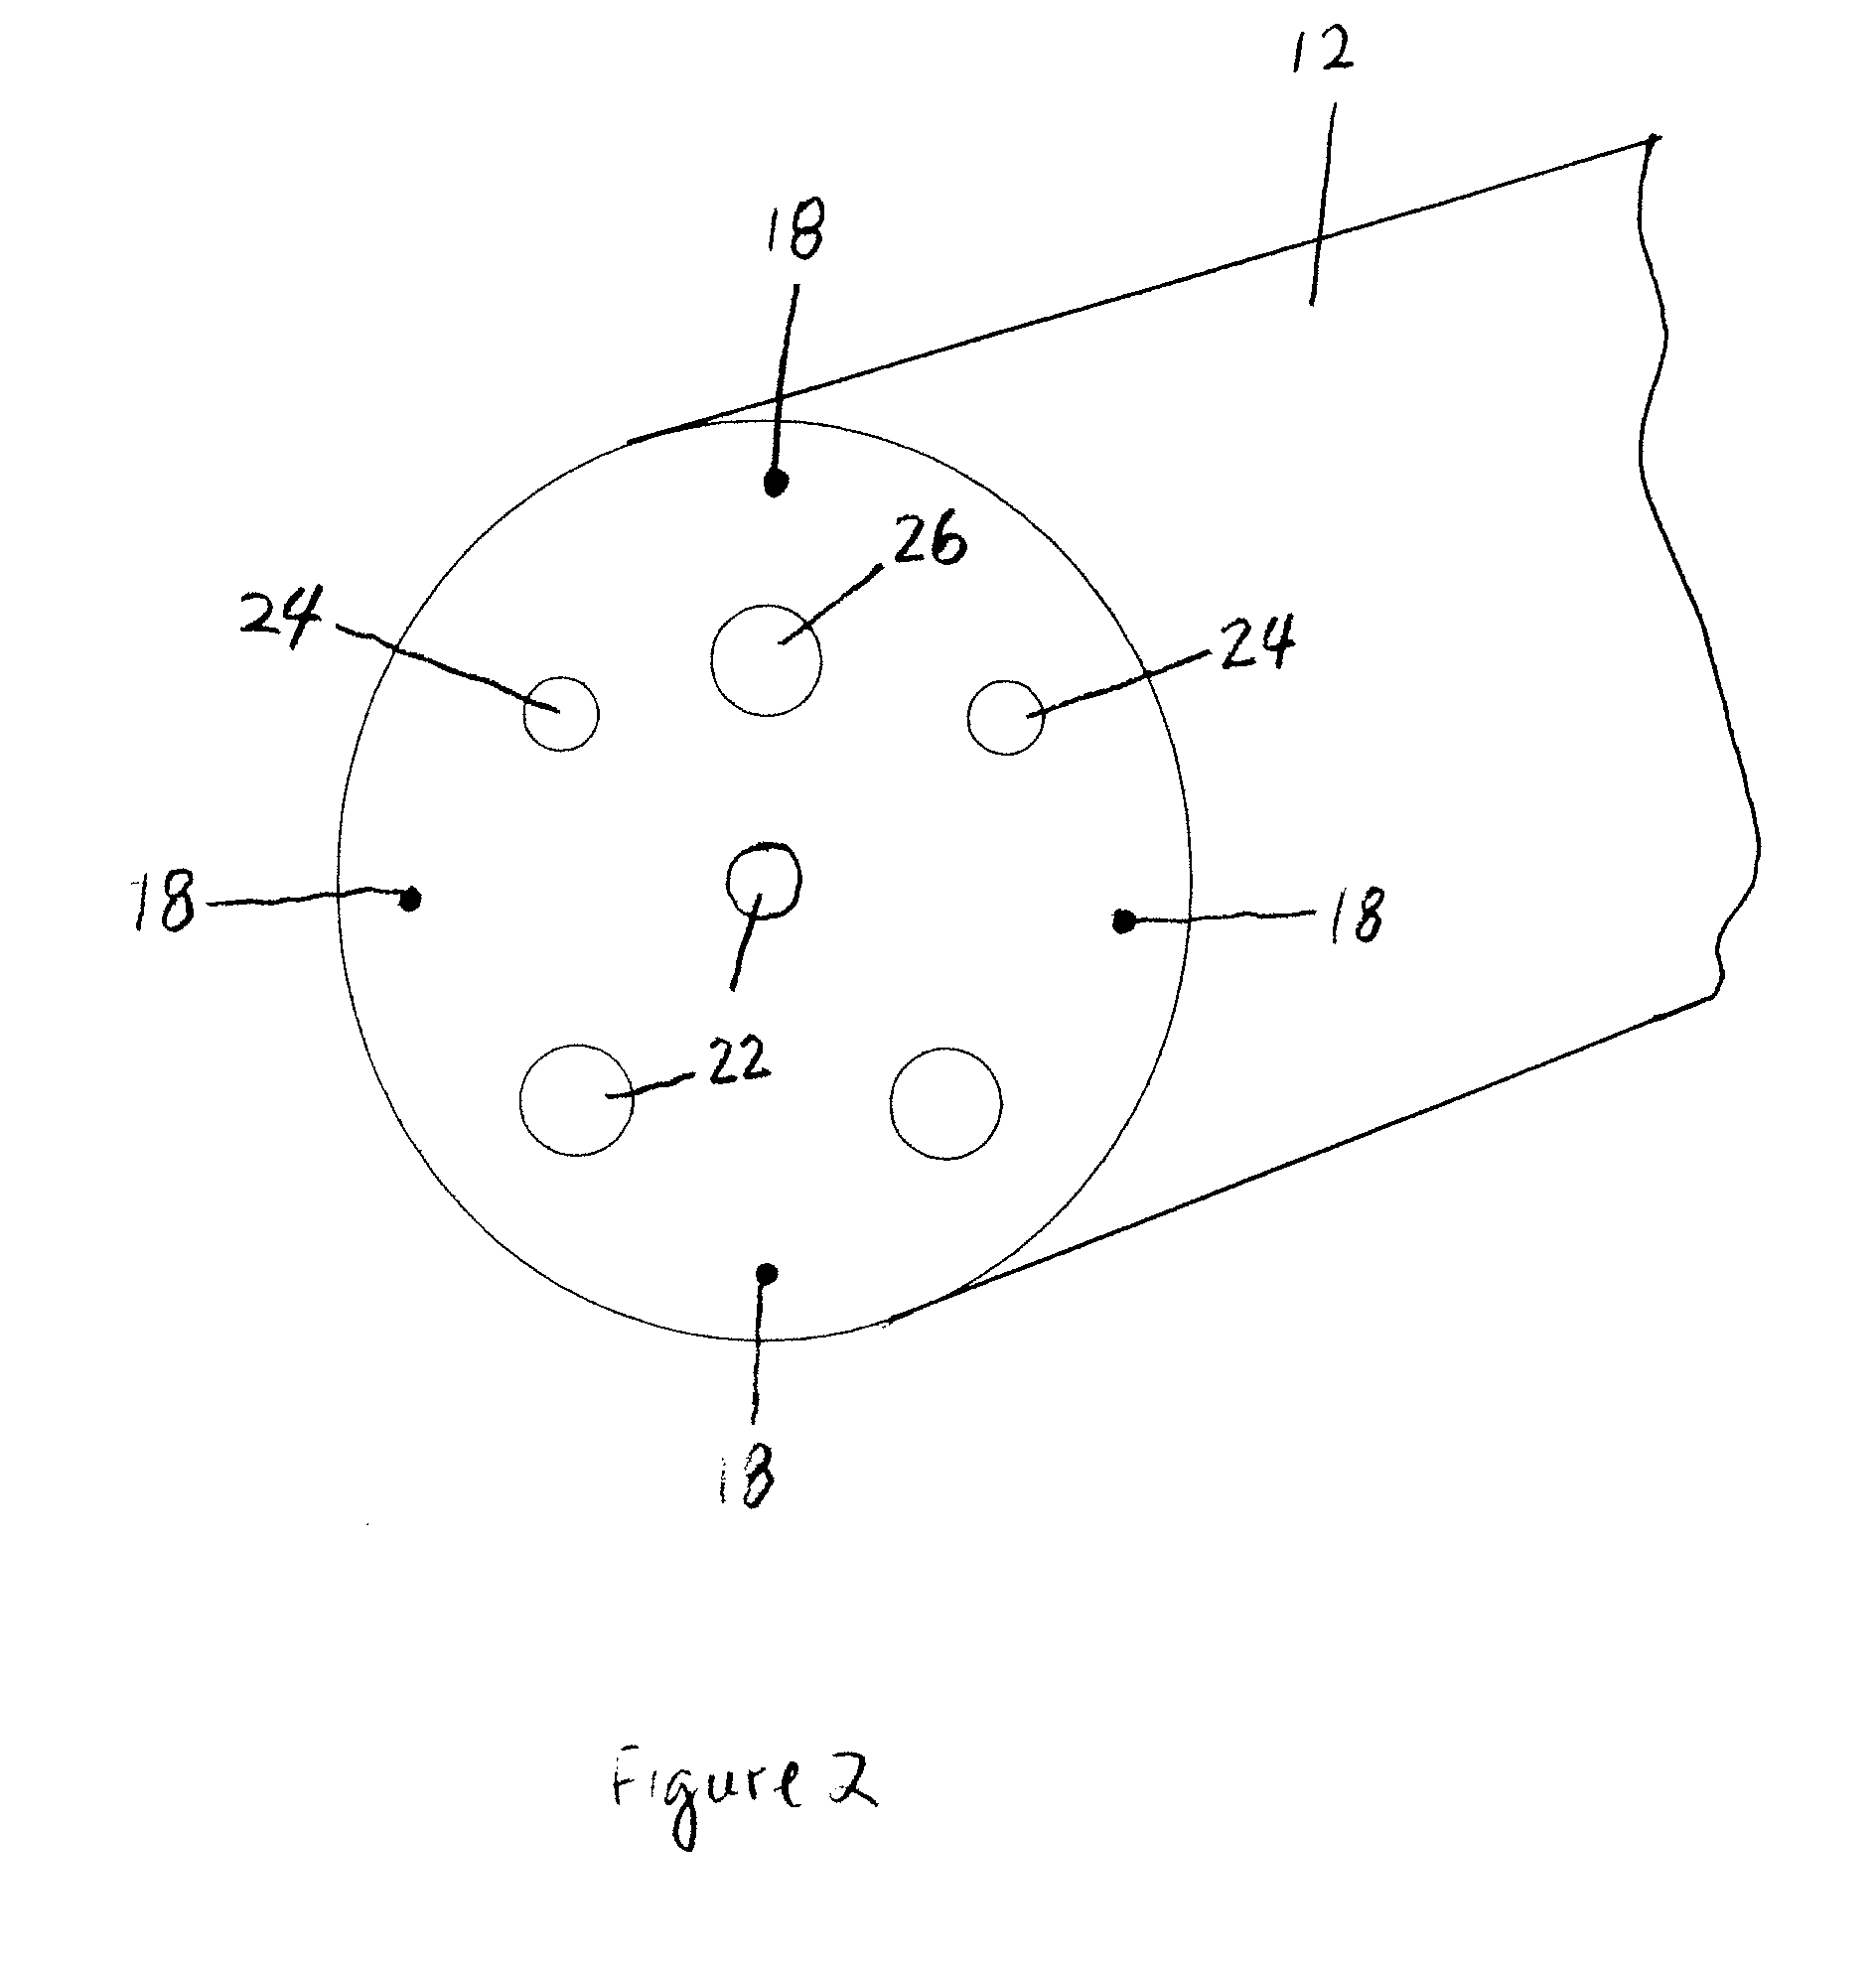 Endoscope having detachable imaging device and method of using